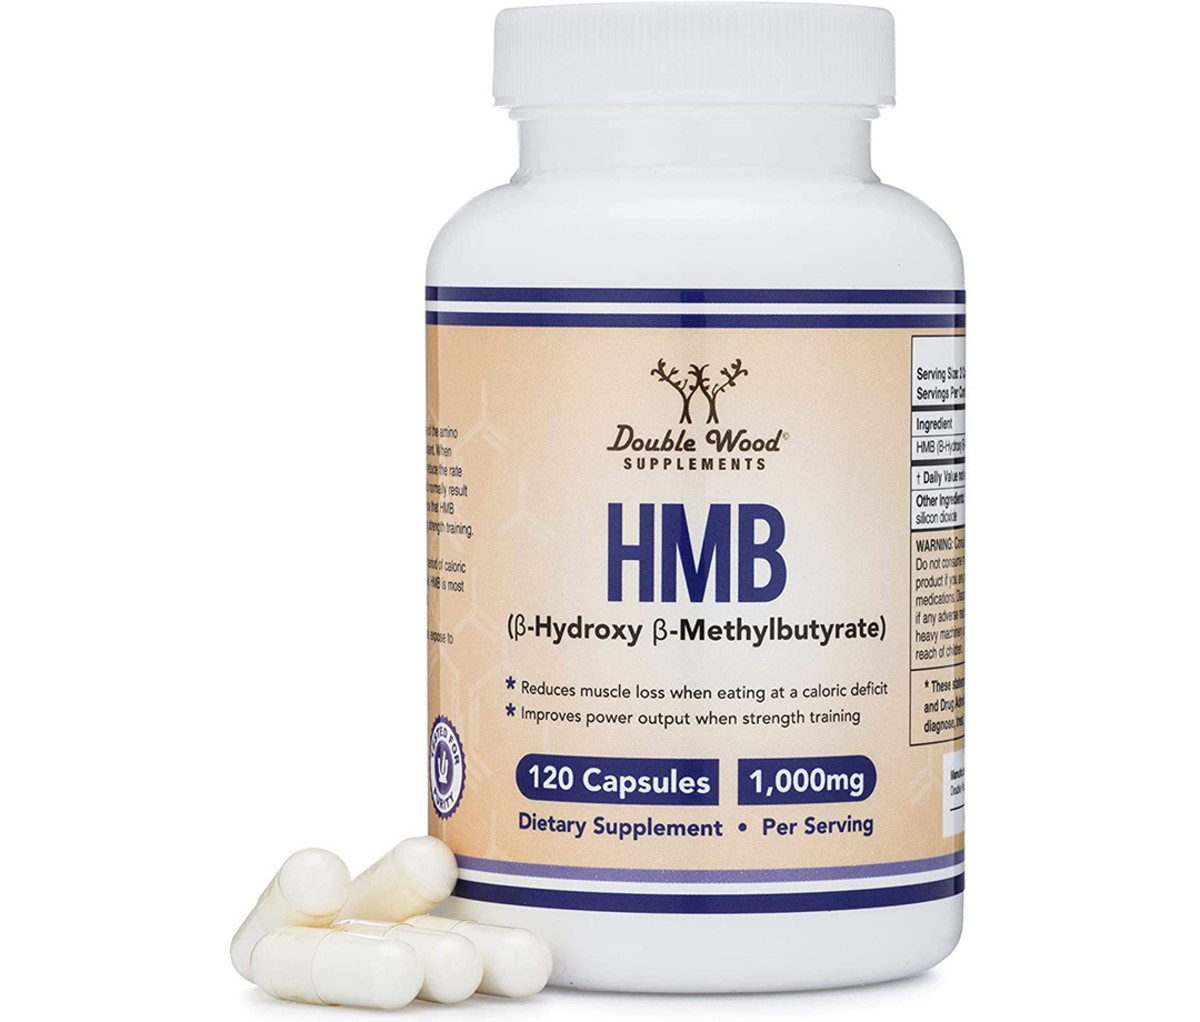 Help Maintain Your Muscles, Even Through Stress, With This HMB Supplement -  Men's Journal